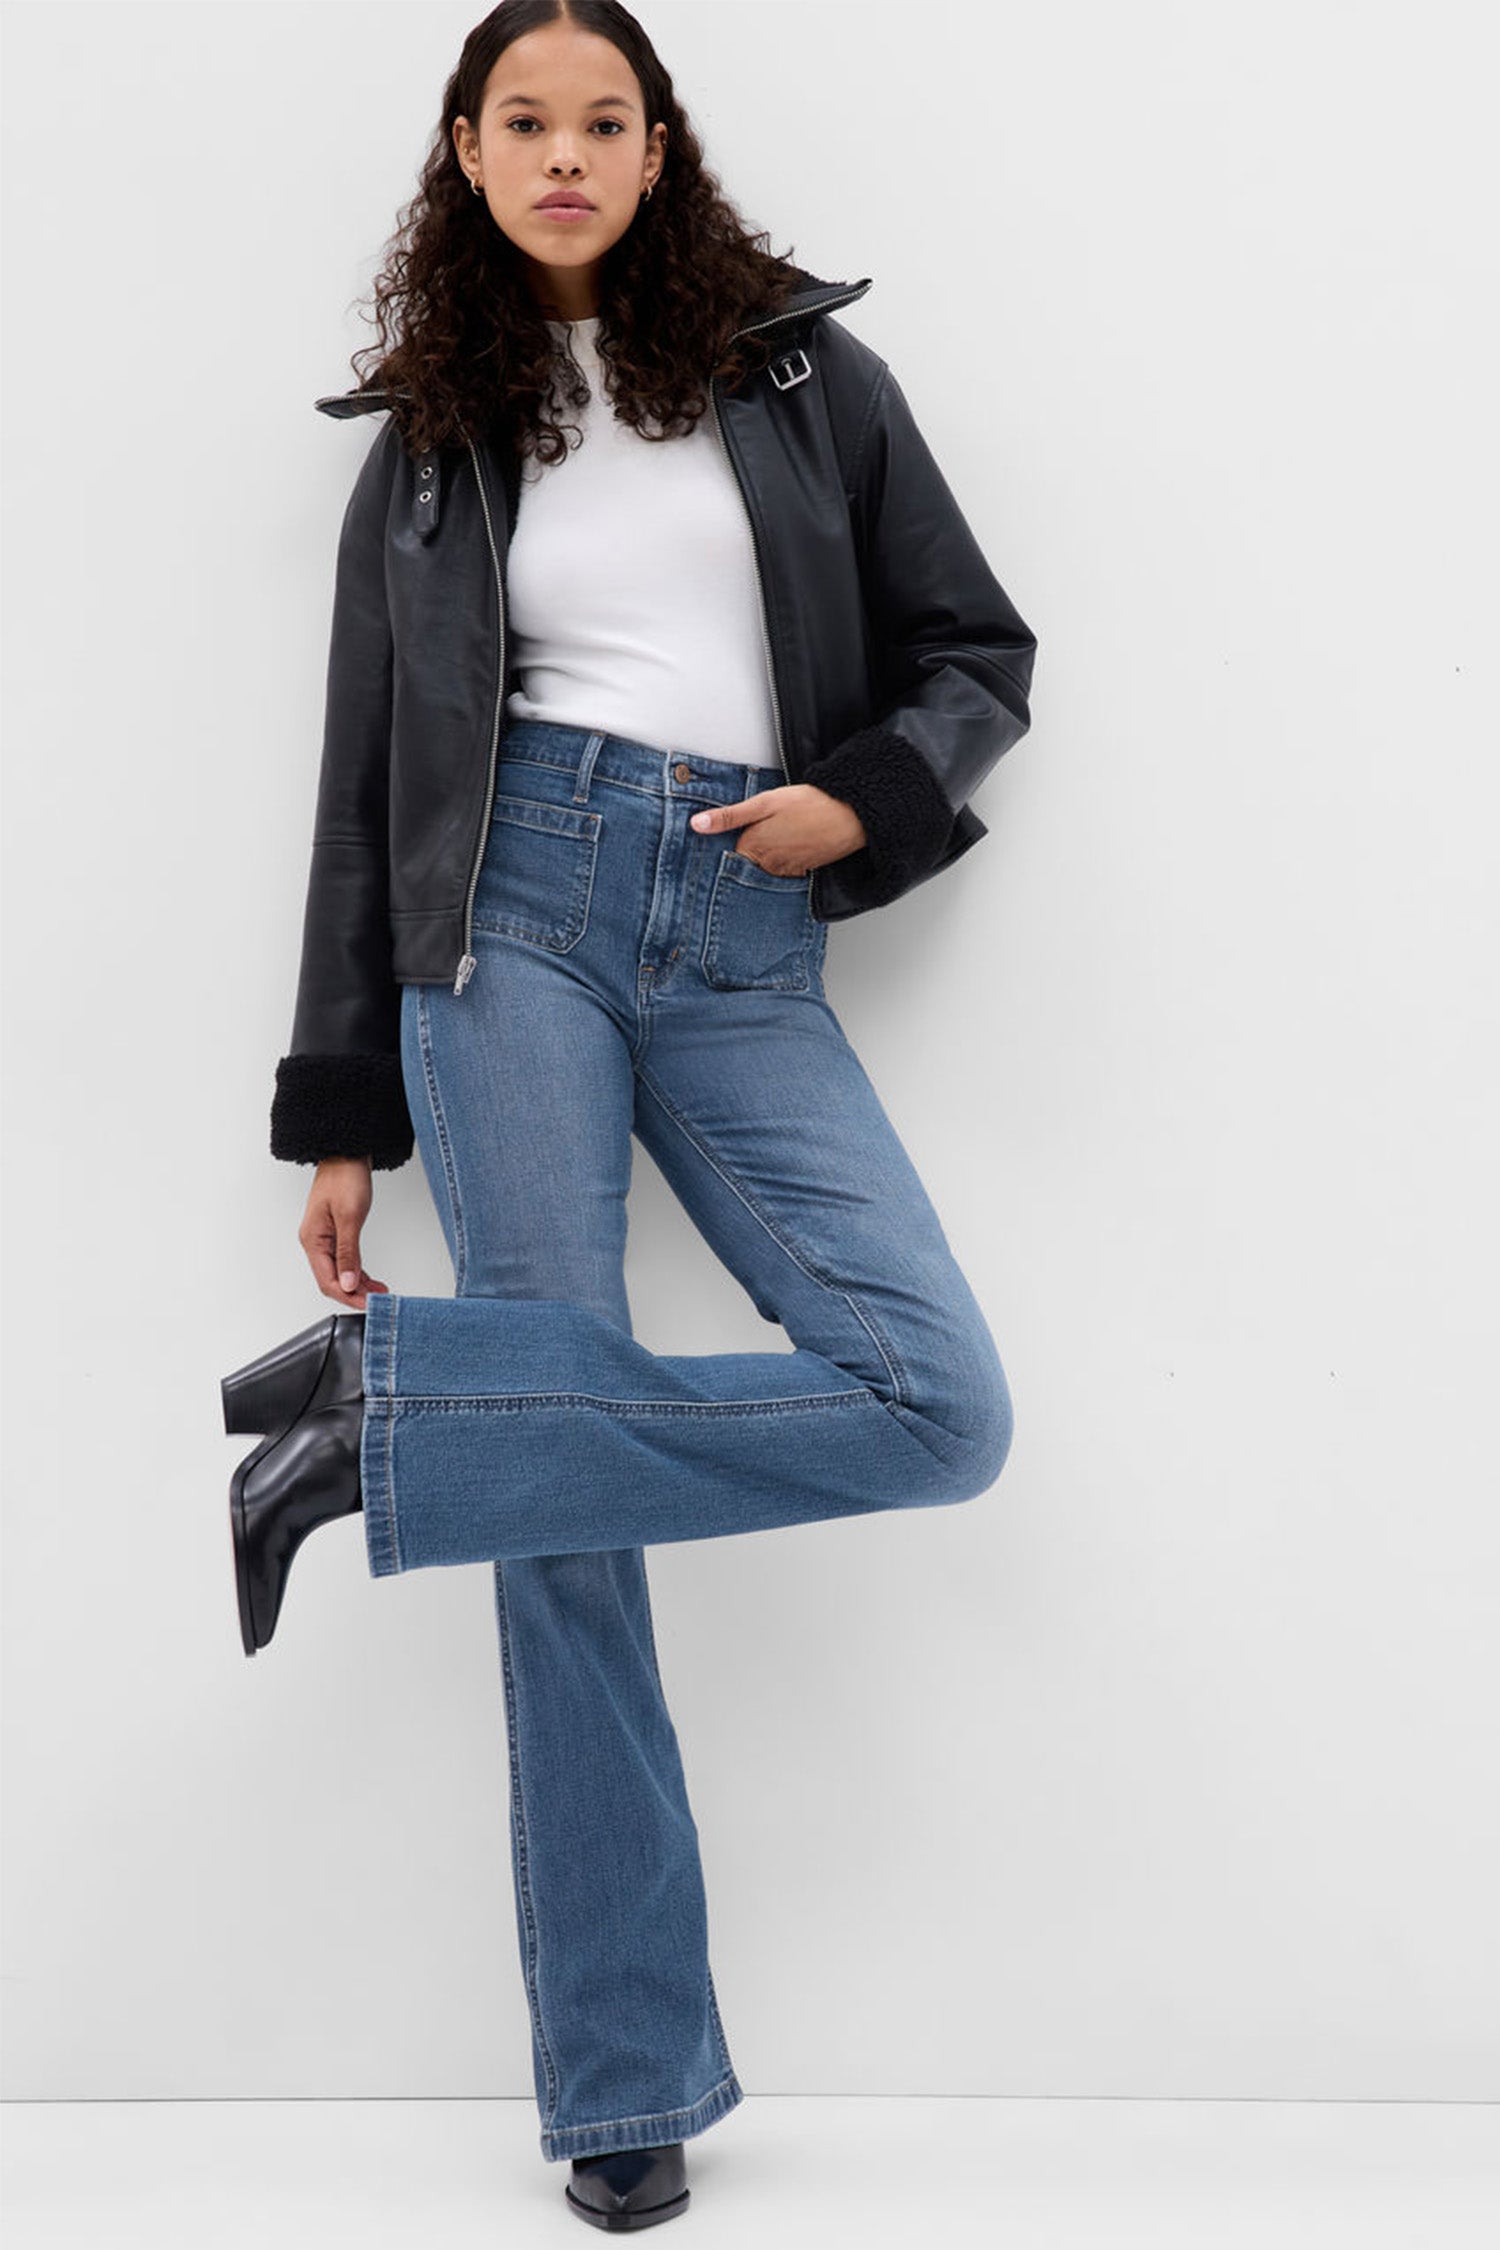 Model wearing blue high rise flare jeans with front pockets